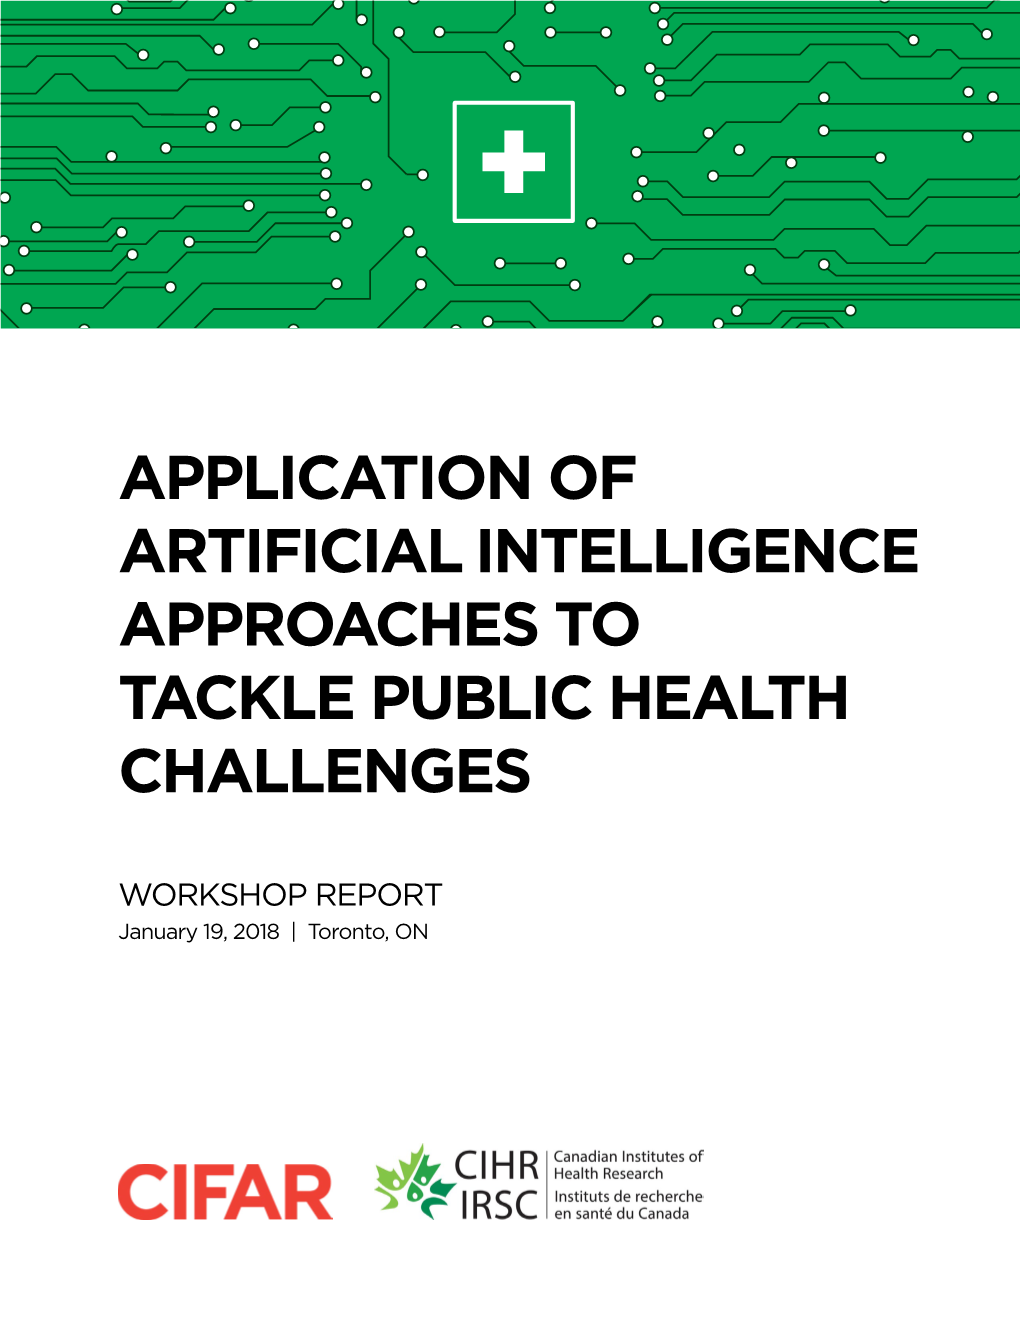 Application of Artificial Intelligence Approaches to Tackle Public Health Challenges